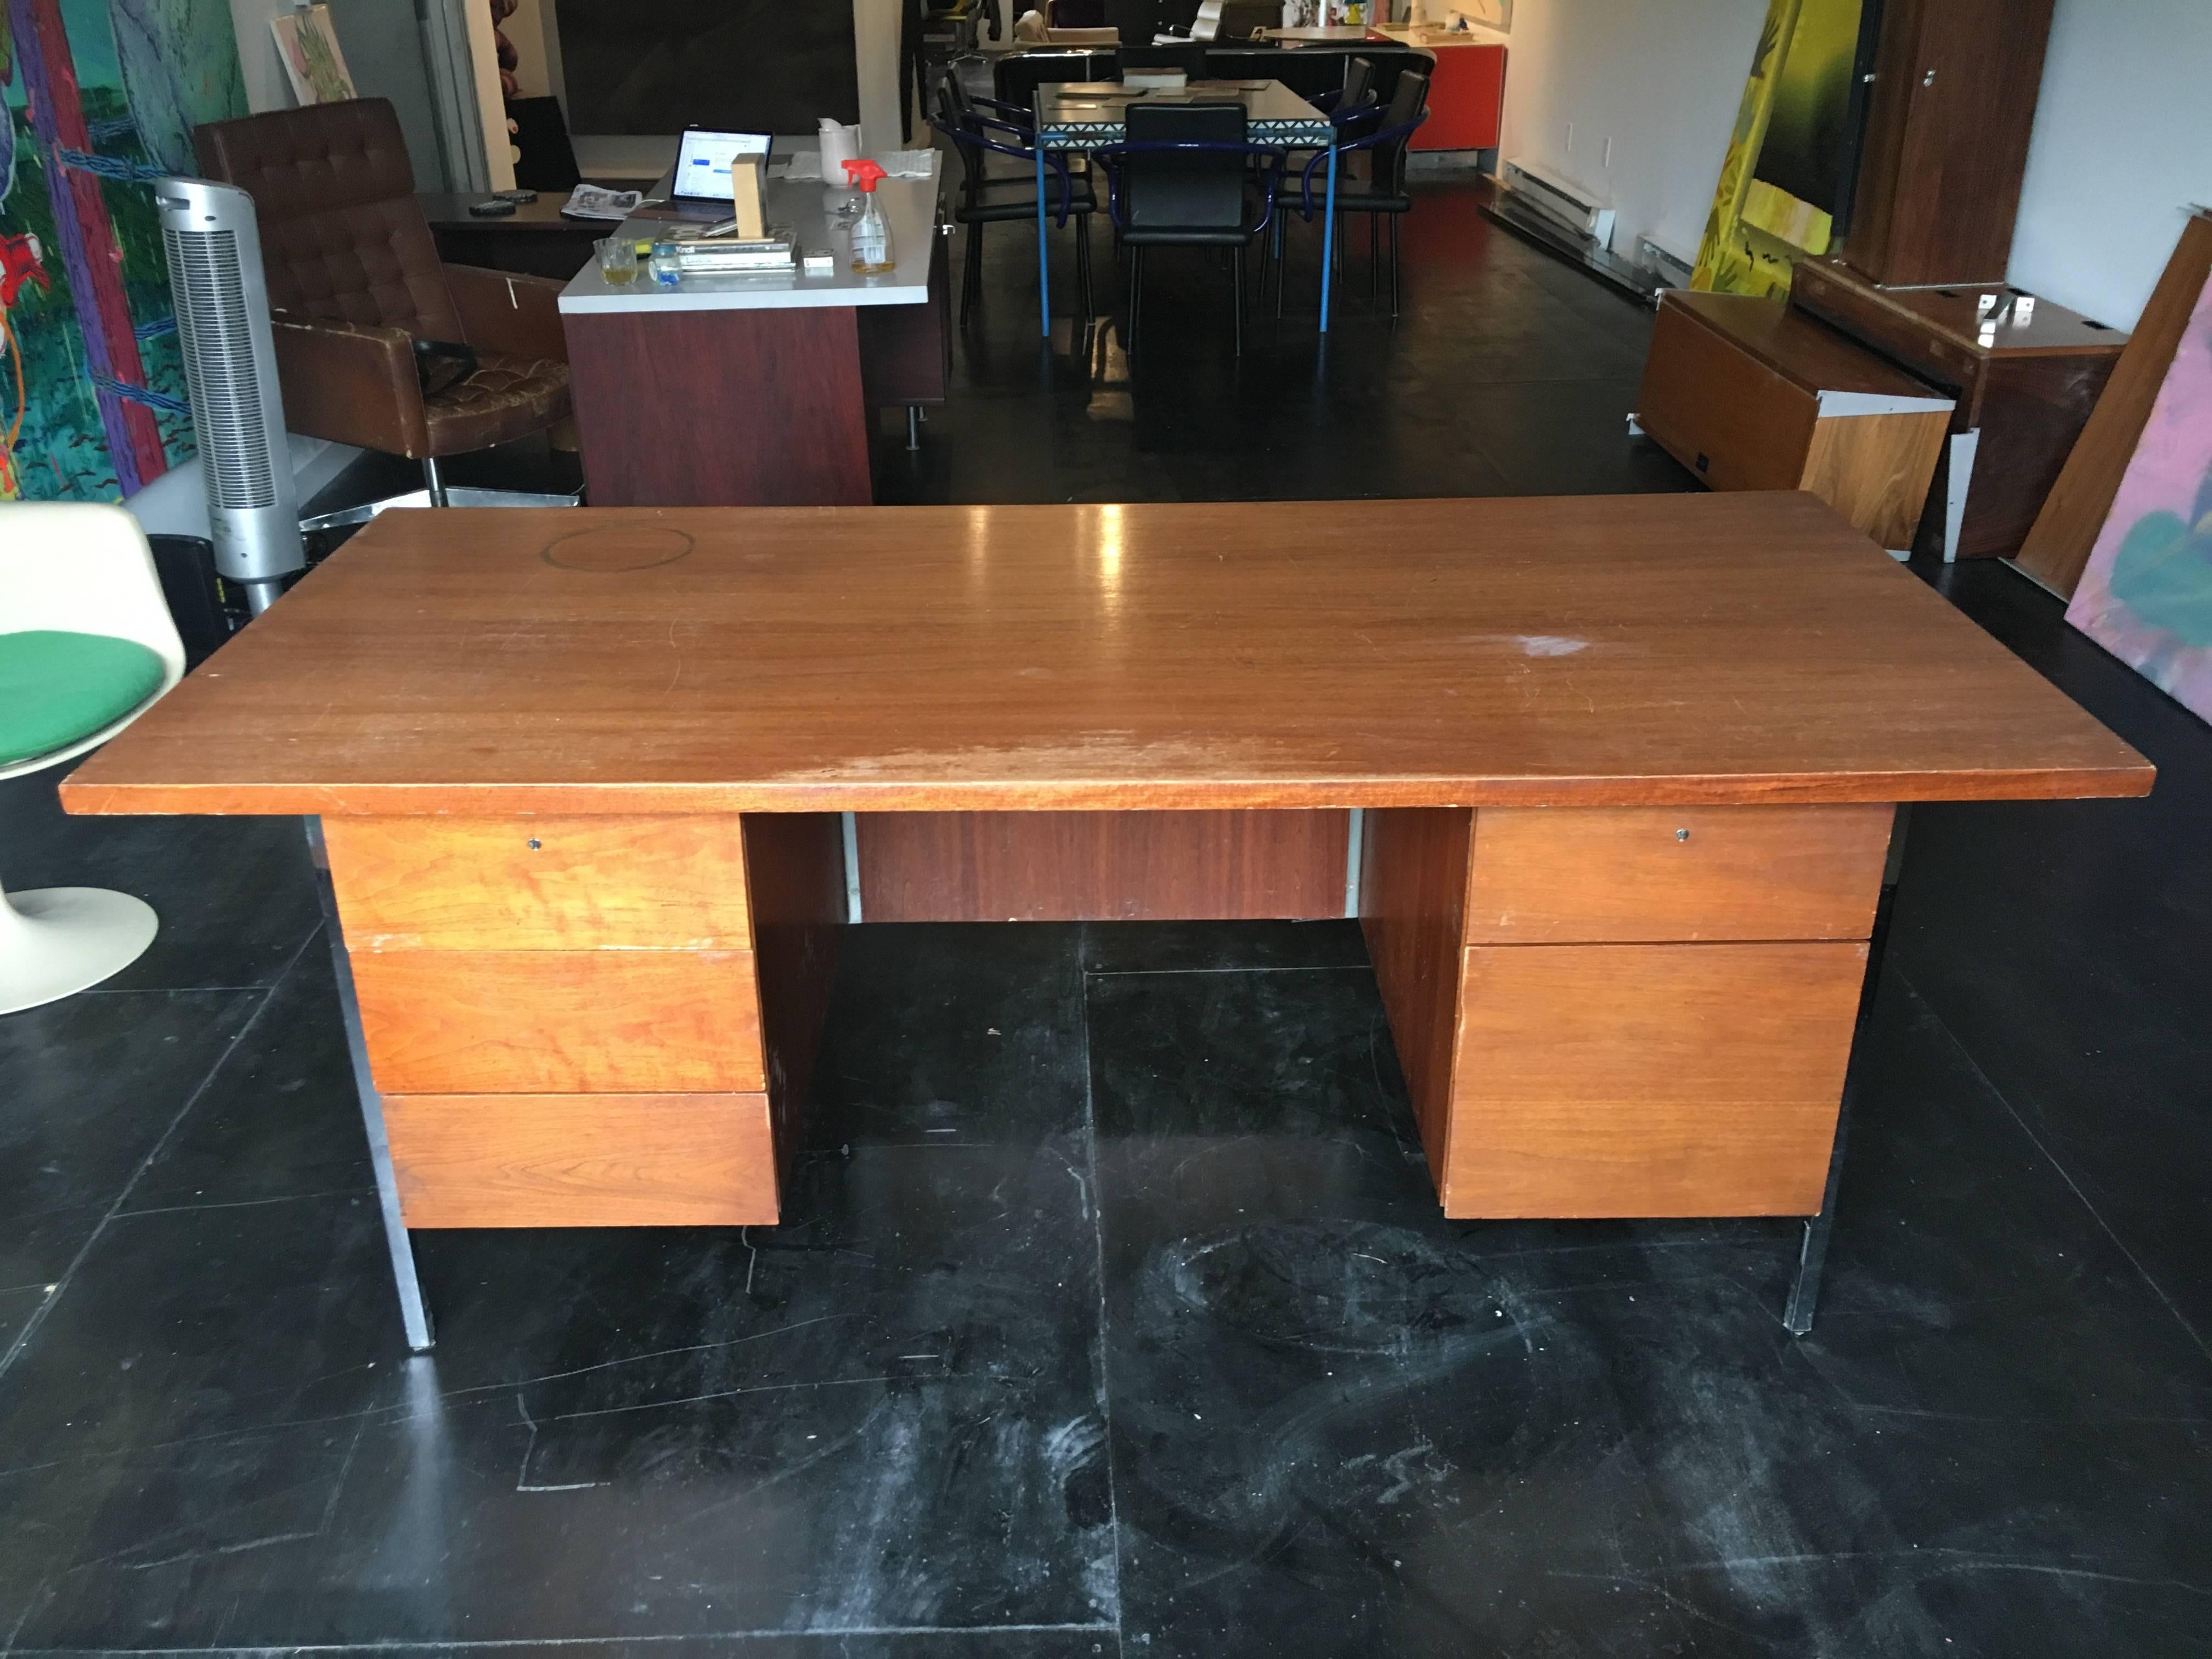 Modern Executive desk, designed by Florence Knoll for Knoll, circa 1960s. Large-scale with a clean lined architectural design. In original condition consistent with age and use. Could profit from being refinished and can be completed in your choice